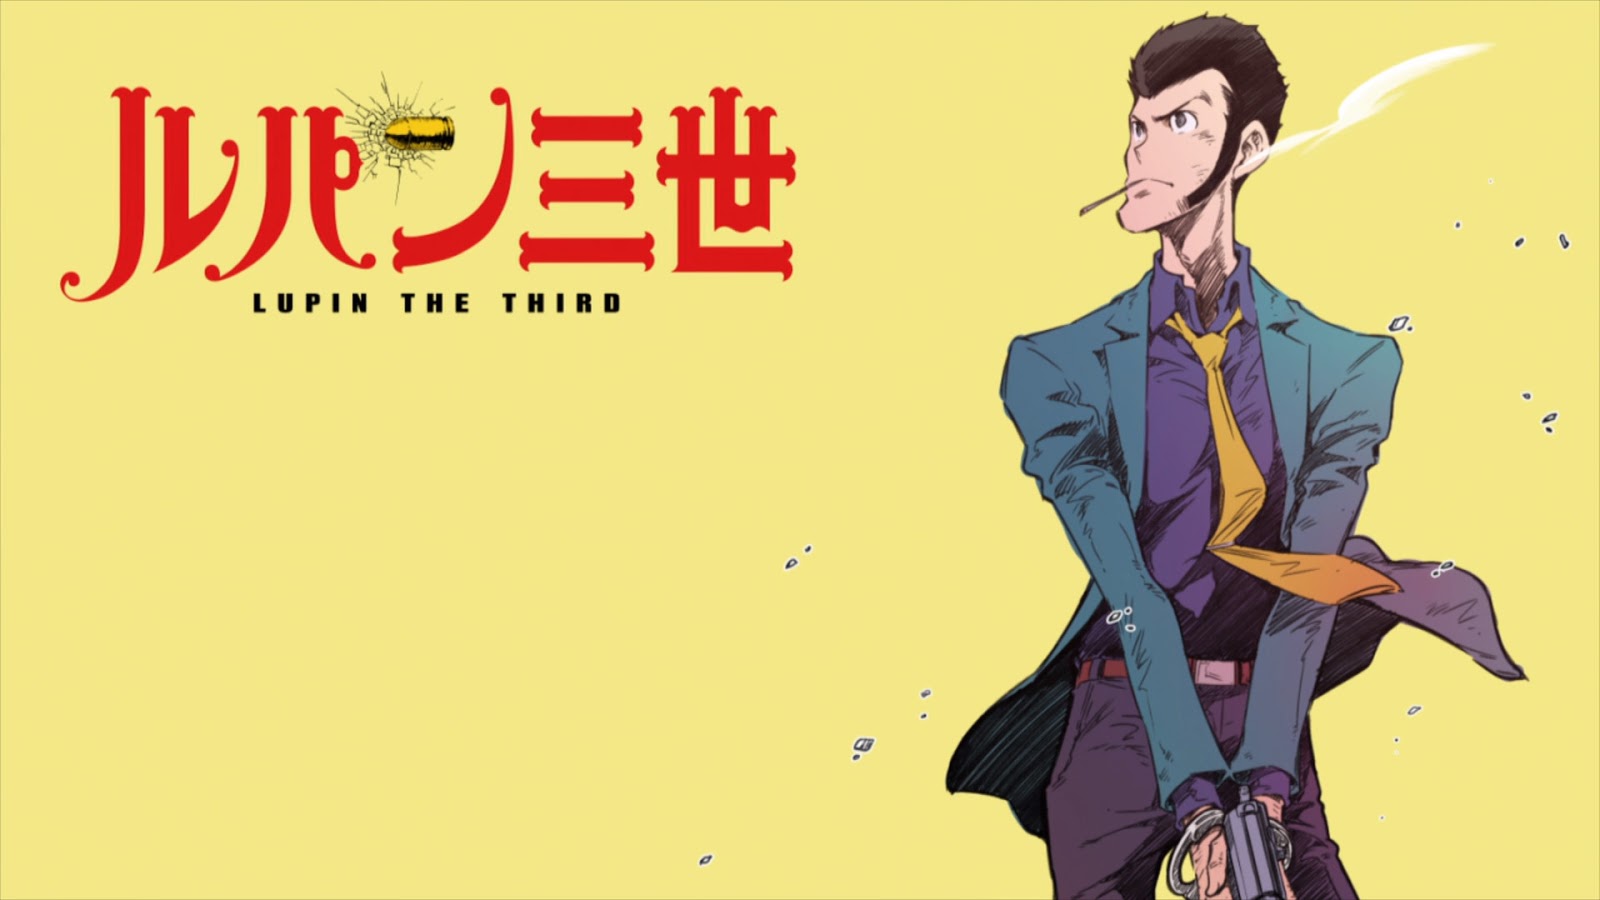 1407893-lupin-the-third-wallpaper-1920x1080-for-android.jpg